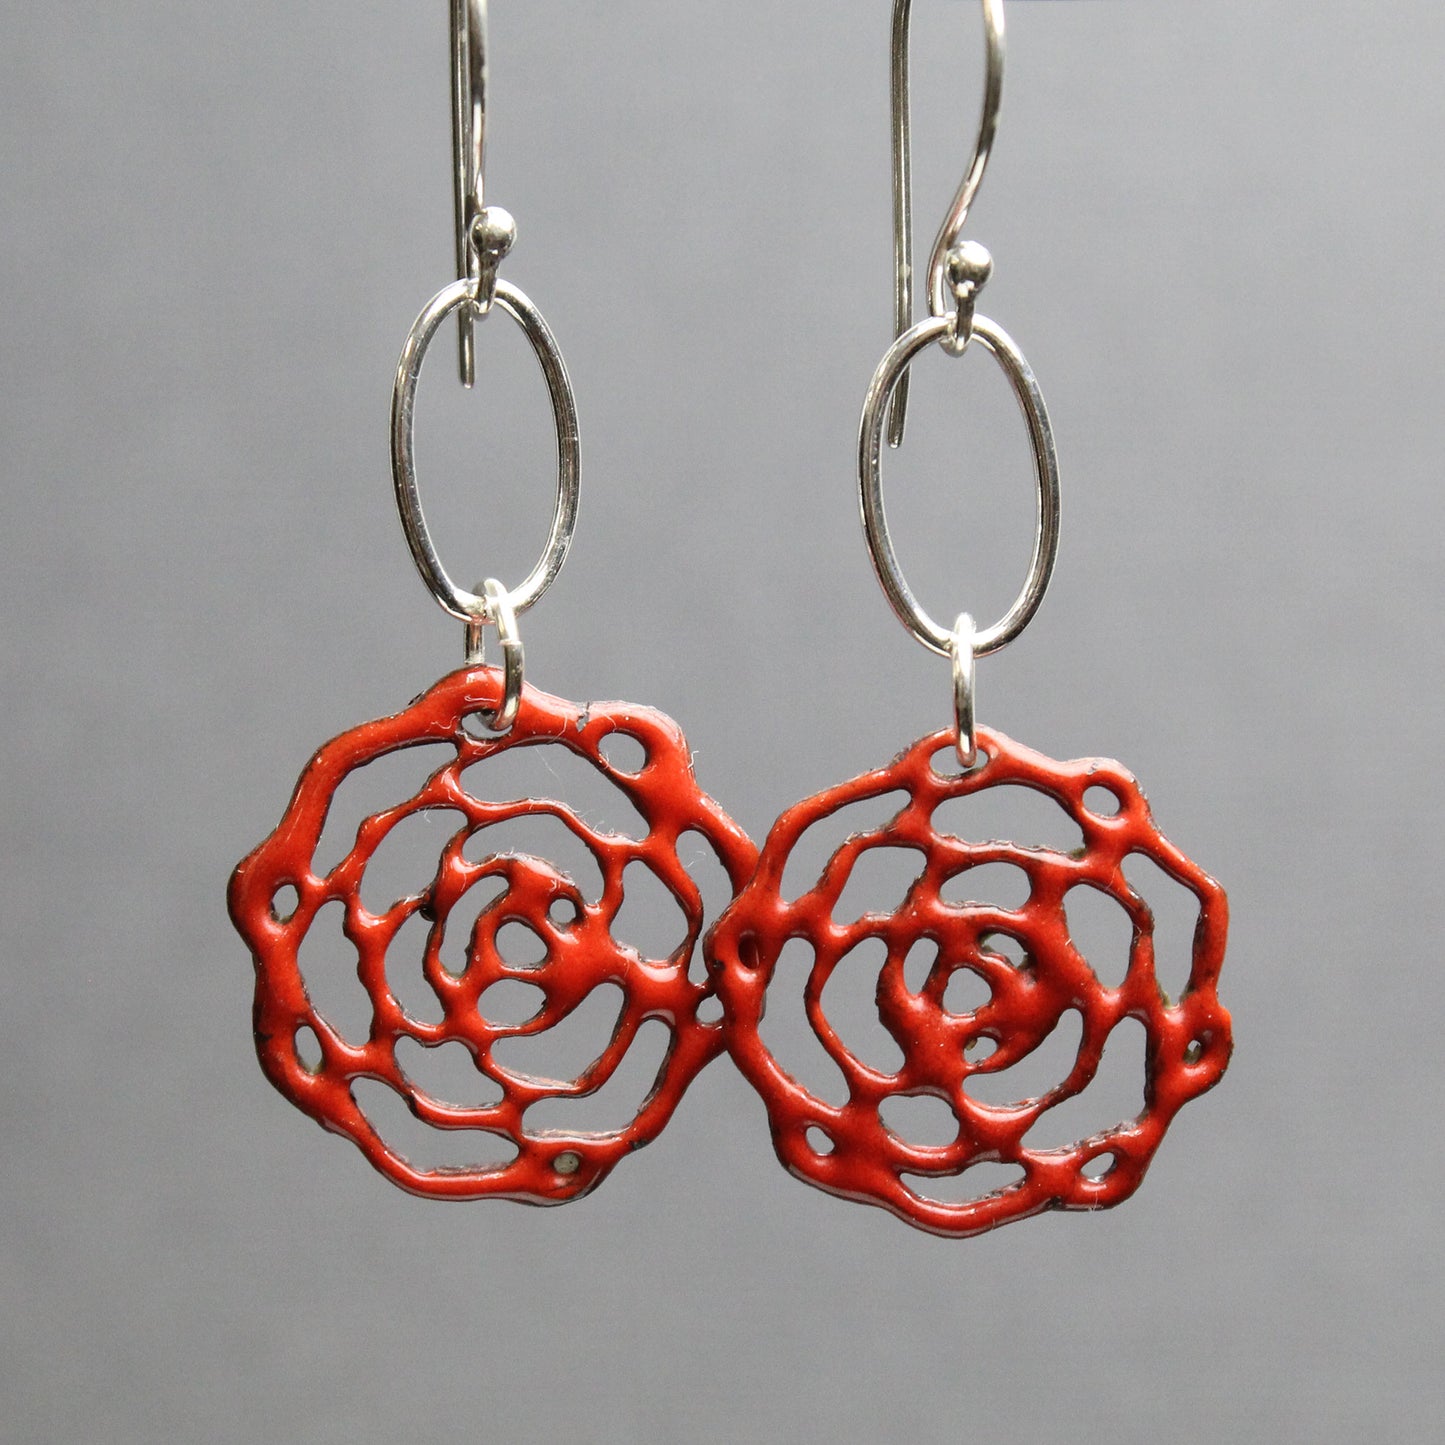 Load image into Gallery viewer, Red Enamel Flower Earrings With Sterling Silver Ear Wires
